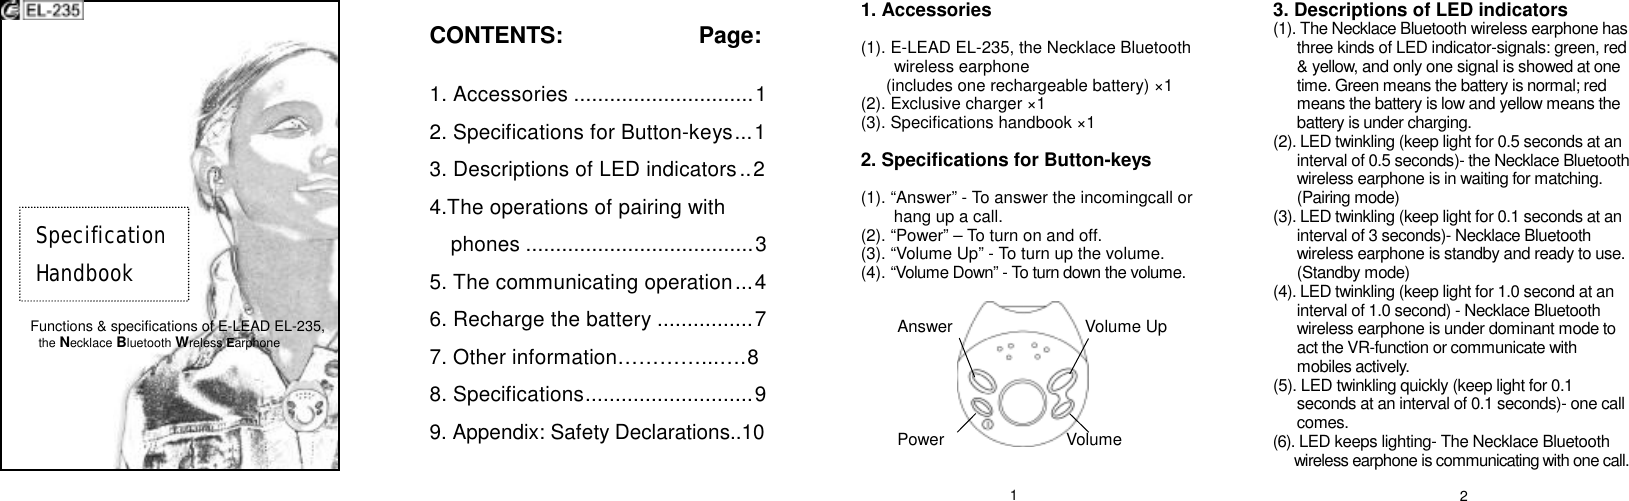                    Functions &amp; specifications of E-LEAD EL-235,  the Necklace Bluetooth Wreless Earphone        CONTENTS:          Page:  1. Accessories..............................1 2. Specifications for Button-keys...1 3. Descriptions of LED indicators..2 4.The operations of pairing with phones......................................3 5. The communicating operation...4 6. Recharge the battery................7 7. Other information…………...…. 8 8. Specifications............................9 9. Appendix: Safety Declarations..10  1. Accessories  (1). E-LEAD EL-235, the Necklace Bluetooth wireless earphone  (includes one rechargeable battery) ×1 (2). Exclusive charger ×1 (3). Specifications handbook ×1  2. Specifications for Button-keys  (1). “Answer” - To answer the incomingcall or hang up a call. (2). “Power” – To turn on and off. (3). “Volume Up” - To turn up the volume. (4). “Volume Down” - To turn down the volume.            3. Descriptions of LED indicators (1). The Necklace Bluetooth wireless earphone has three kinds of LED indicator-signals: green, red &amp; yellow, and only one signal is showed at one time. Green means the battery is normal; red means the battery is low and yellow means the battery is under charging. (2). LED twinkling (keep light for 0.5 seconds at an interval of 0.5 seconds)- the Necklace Bluetooth wireless earphone is in waiting for matching. (Pairing mode) (3). LED twinkling (keep light for 0.1 seconds at an interval of 3 seconds)- Necklace Bluetooth wireless earphone is standby and ready to use. (Standby mode) (4). LED twinkling (keep light for 1.0 second at an interval of 1.0 second) - Necklace Bluetooth wireless earphone is under dominant mode to act the VR-function or communicate with mobiles actively. (5). LED twinkling quickly (keep light for 0.1 seconds at an interval of 0.1 seconds)- one call comes. (6). LED keeps lighting- The Necklace Bluetooth  wireless earphone is communicating with one call. Specification  Handbook Volume     Power Volume Up Answer 1  2 